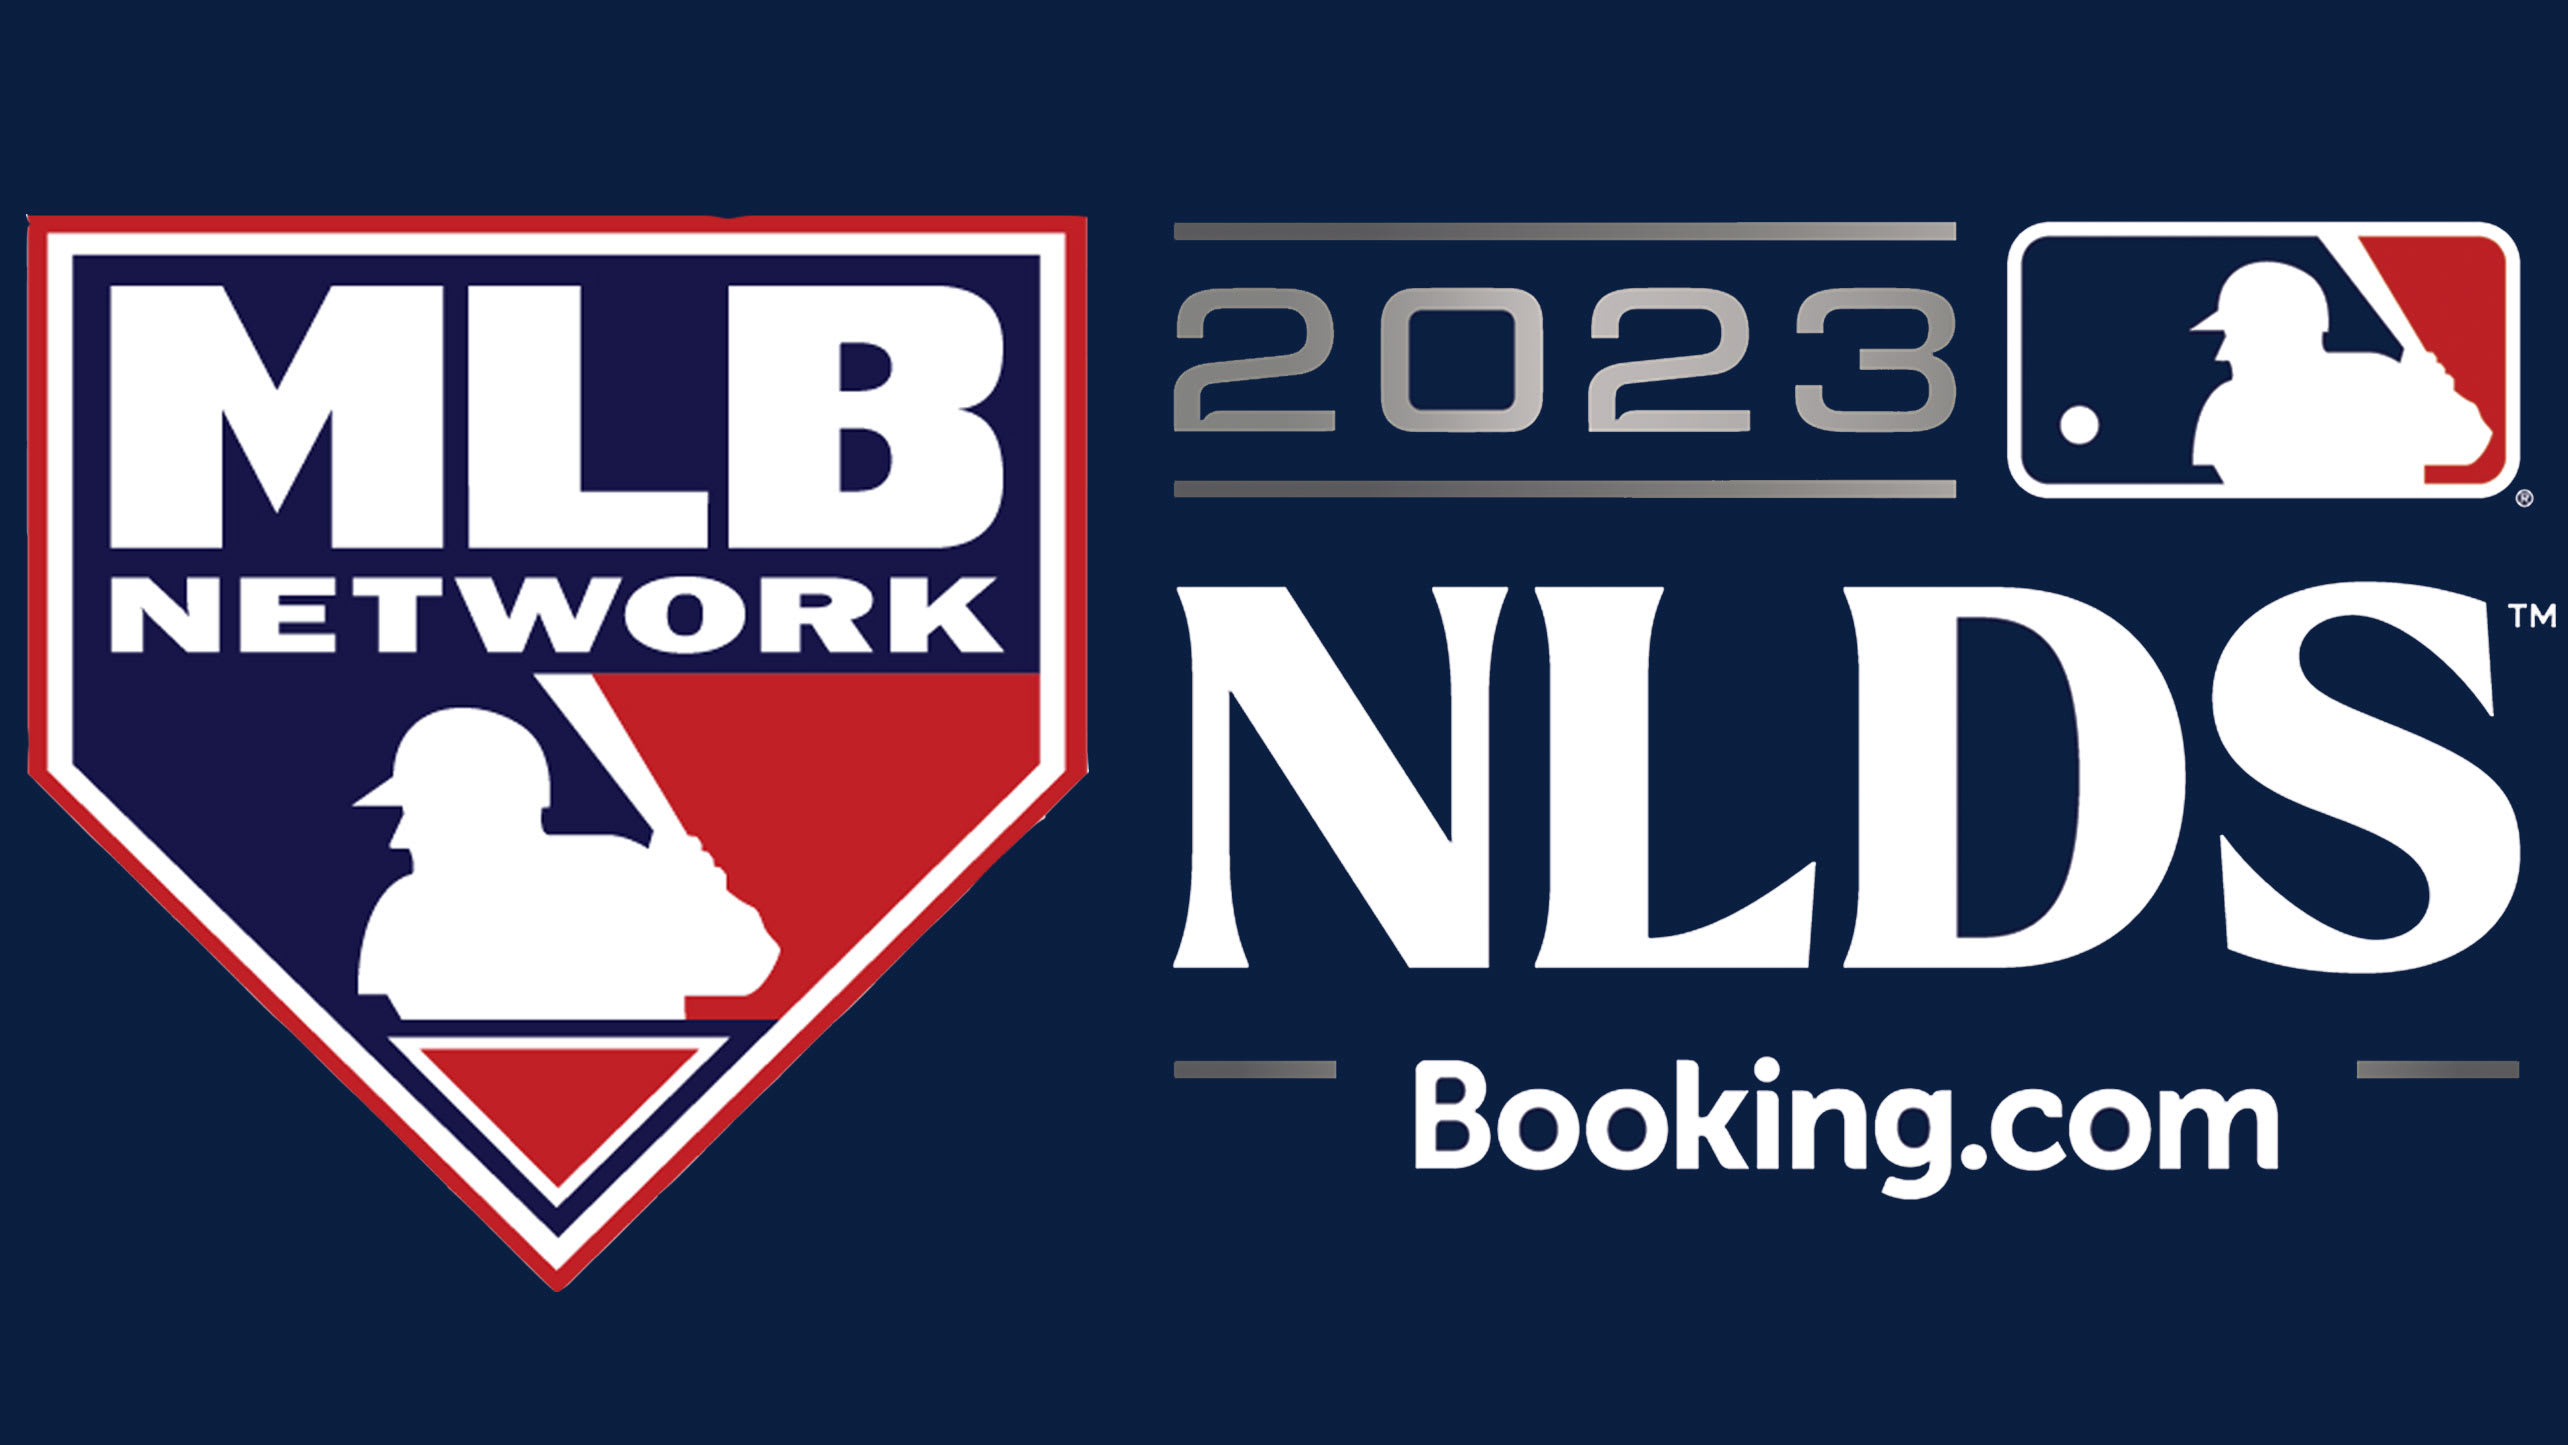 MLB Network and NLDS logos